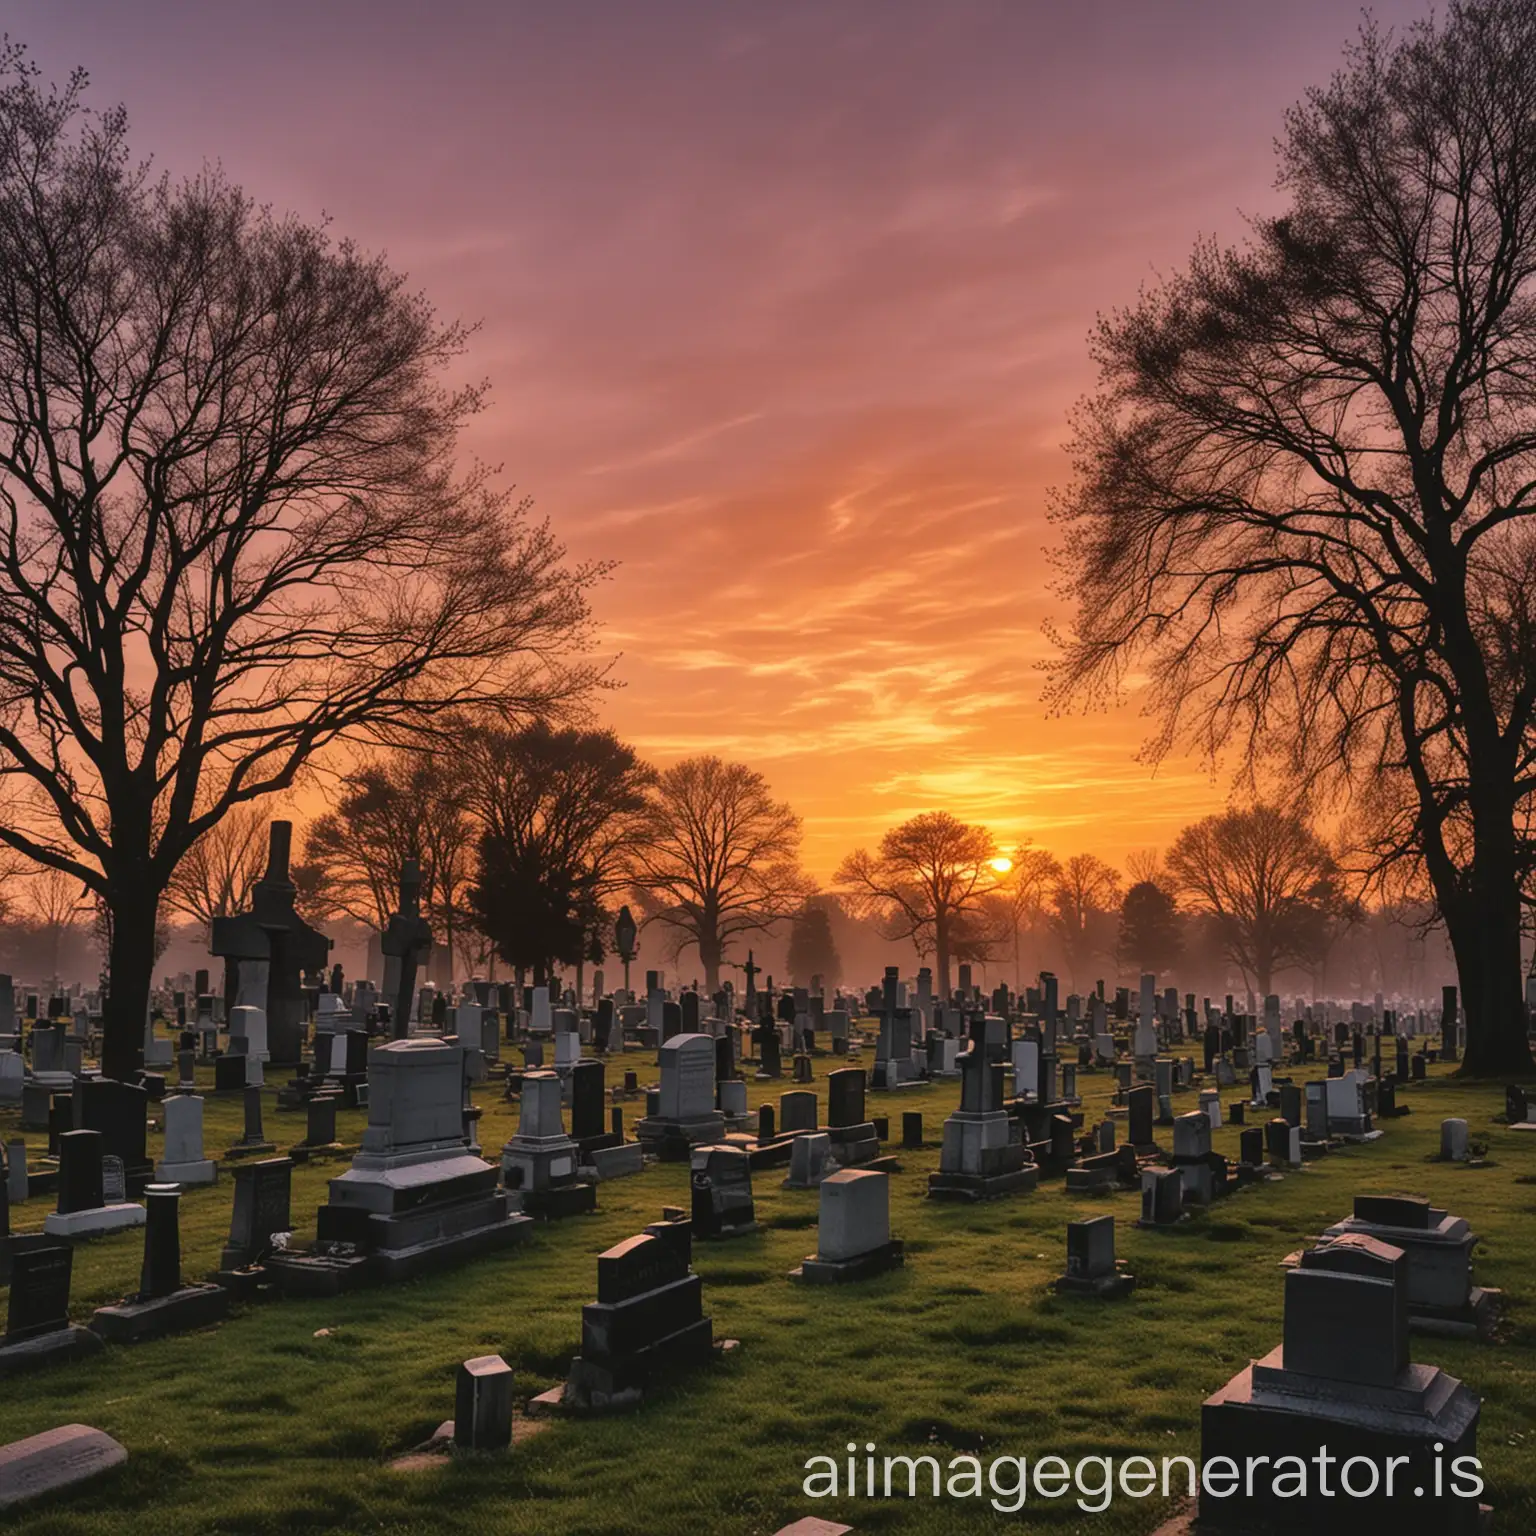 Cemetery at sunset